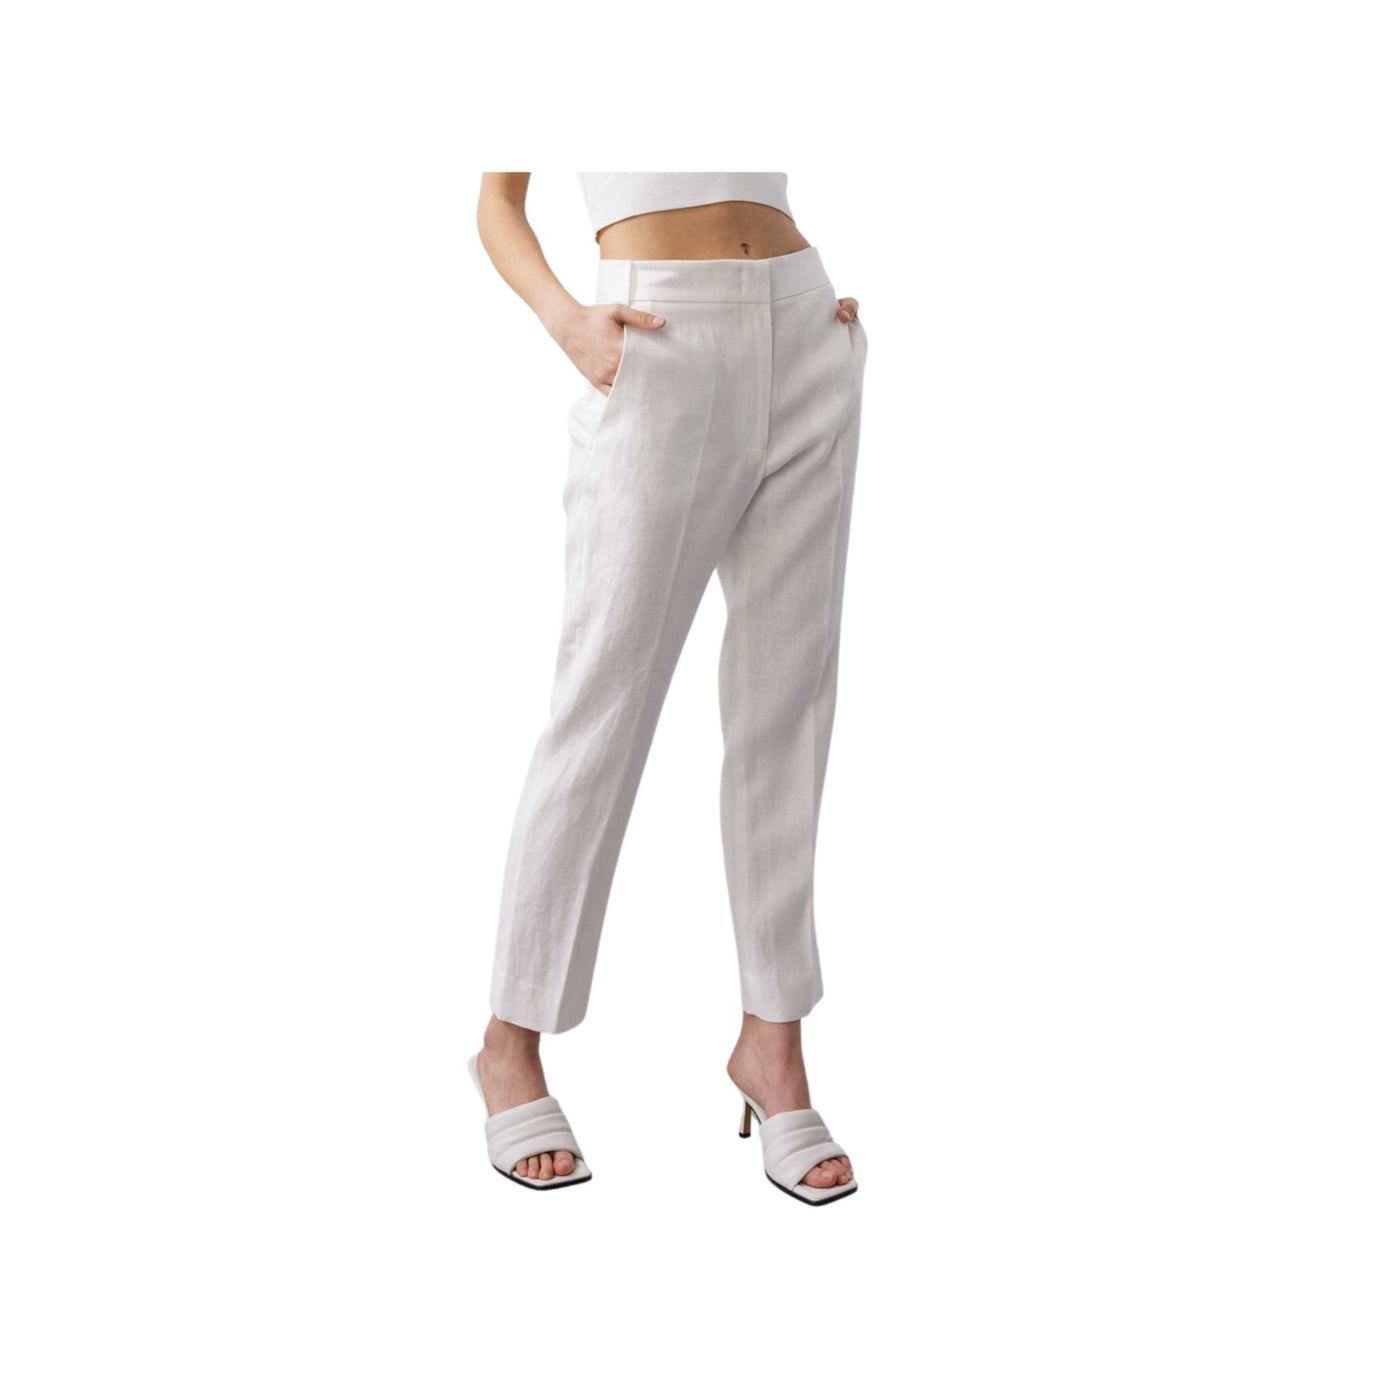 Straight-line women's trousers